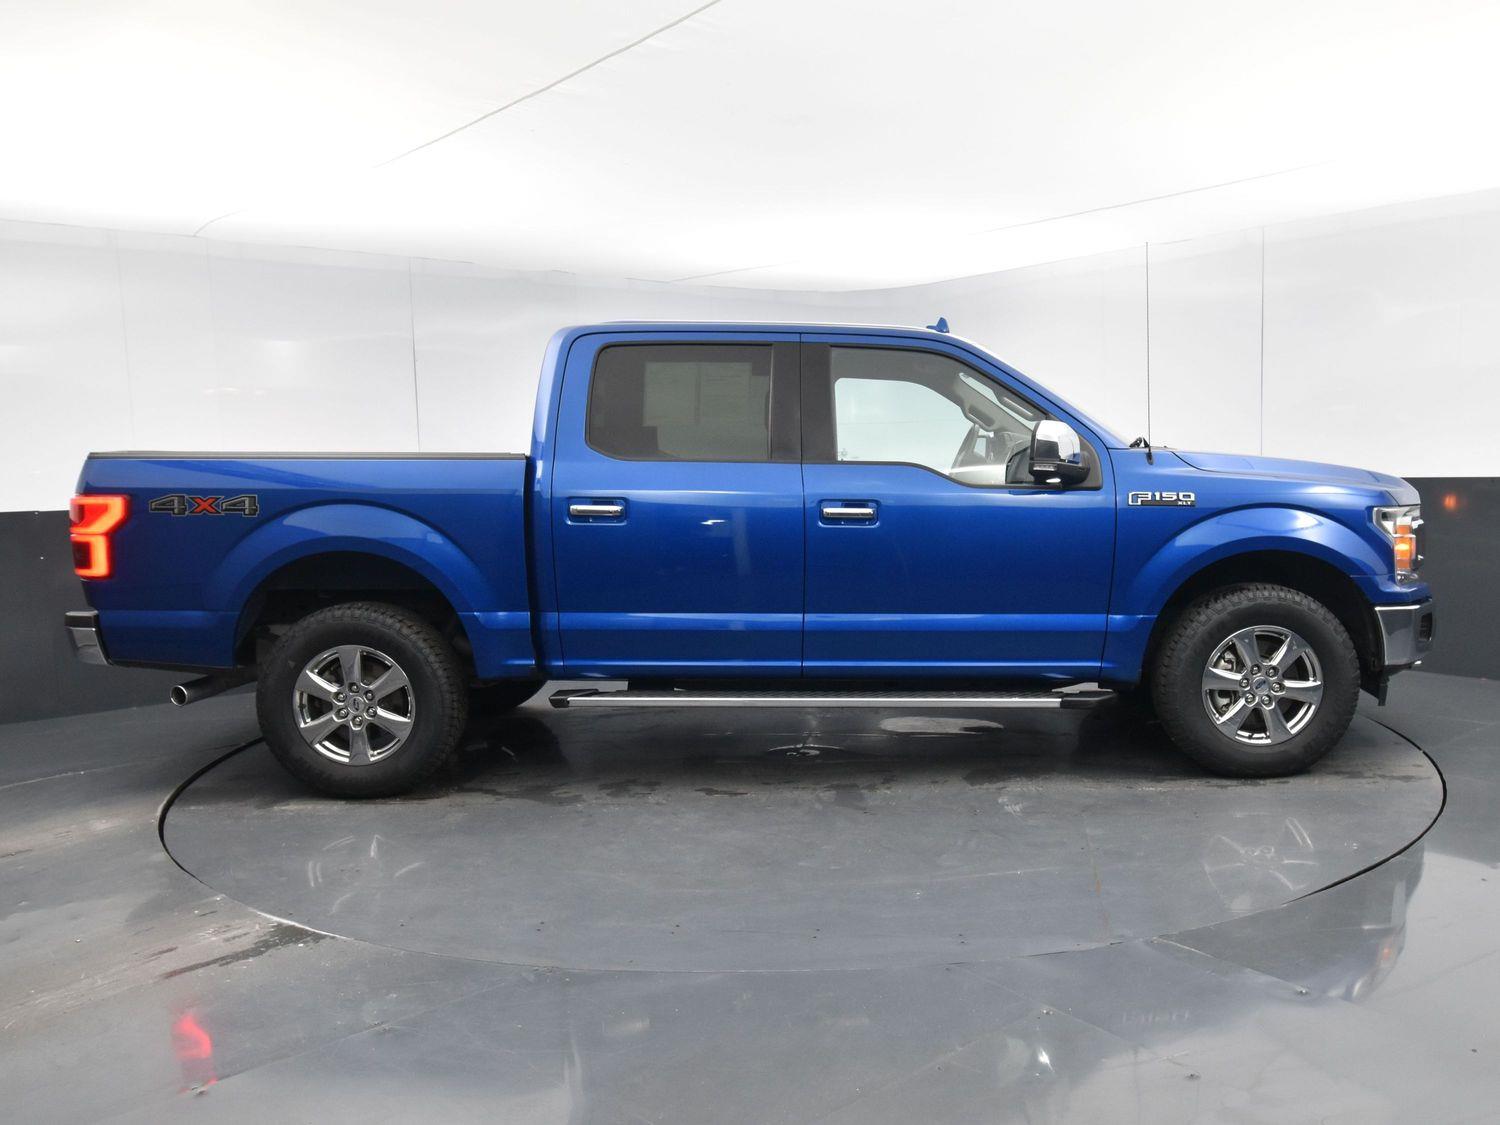 Used 2018 Ford F-150 XLT Crew Cab Truck for sale in Grand Island NE